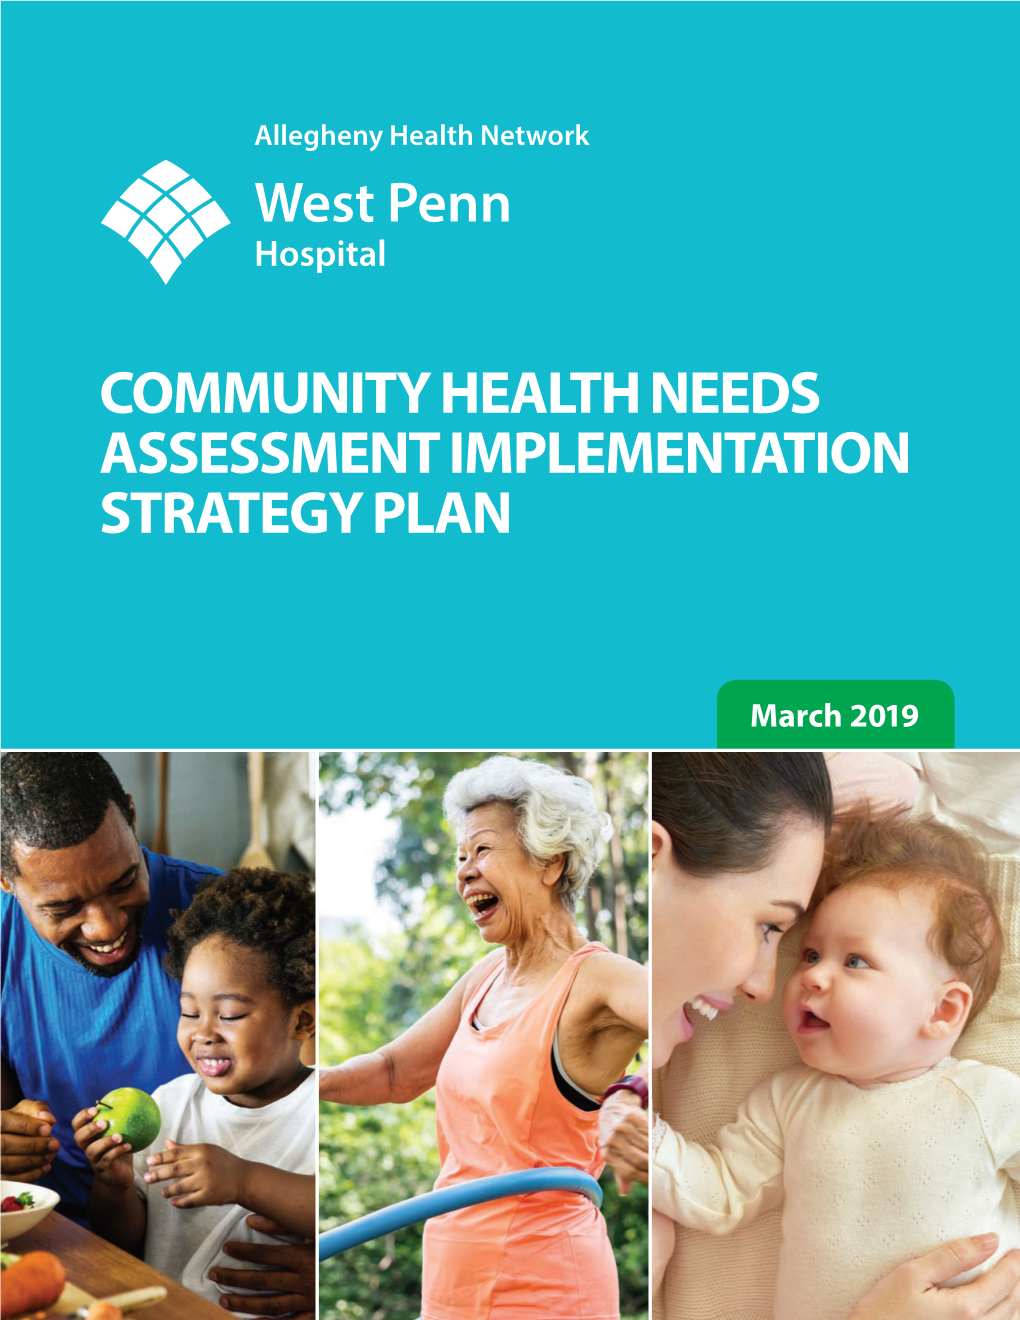 Community Health Needs Assessment Implementation Strategy Plan